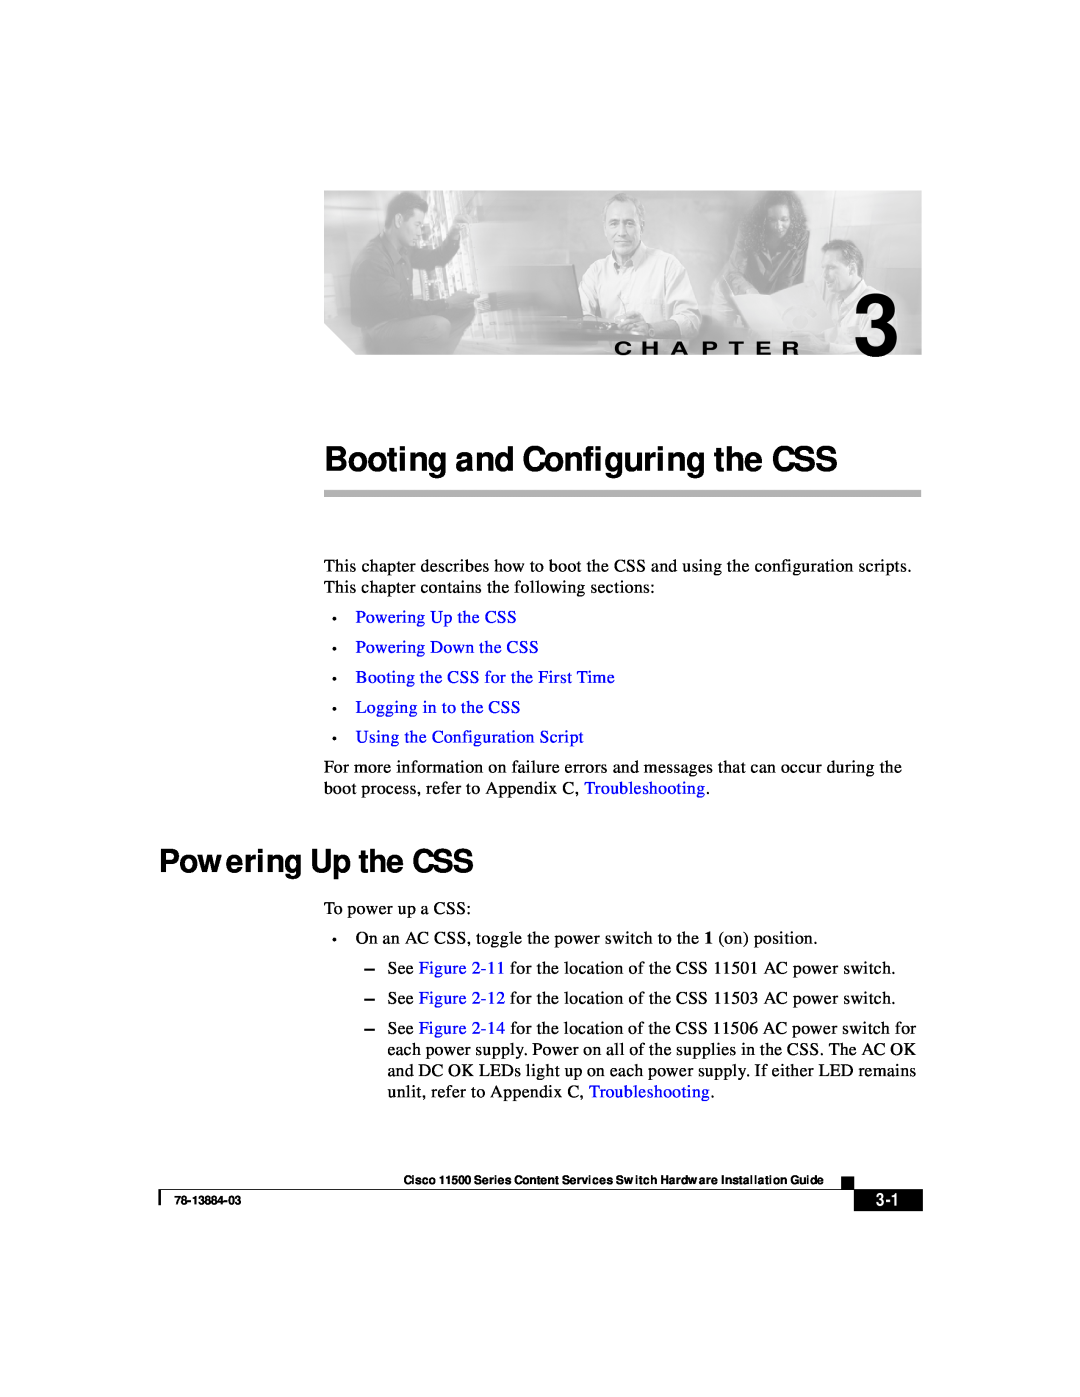 Cisco Systems 11500 Series manual Booting and Configuring the CSS, Powering Up the CSS, C H A P T E R 